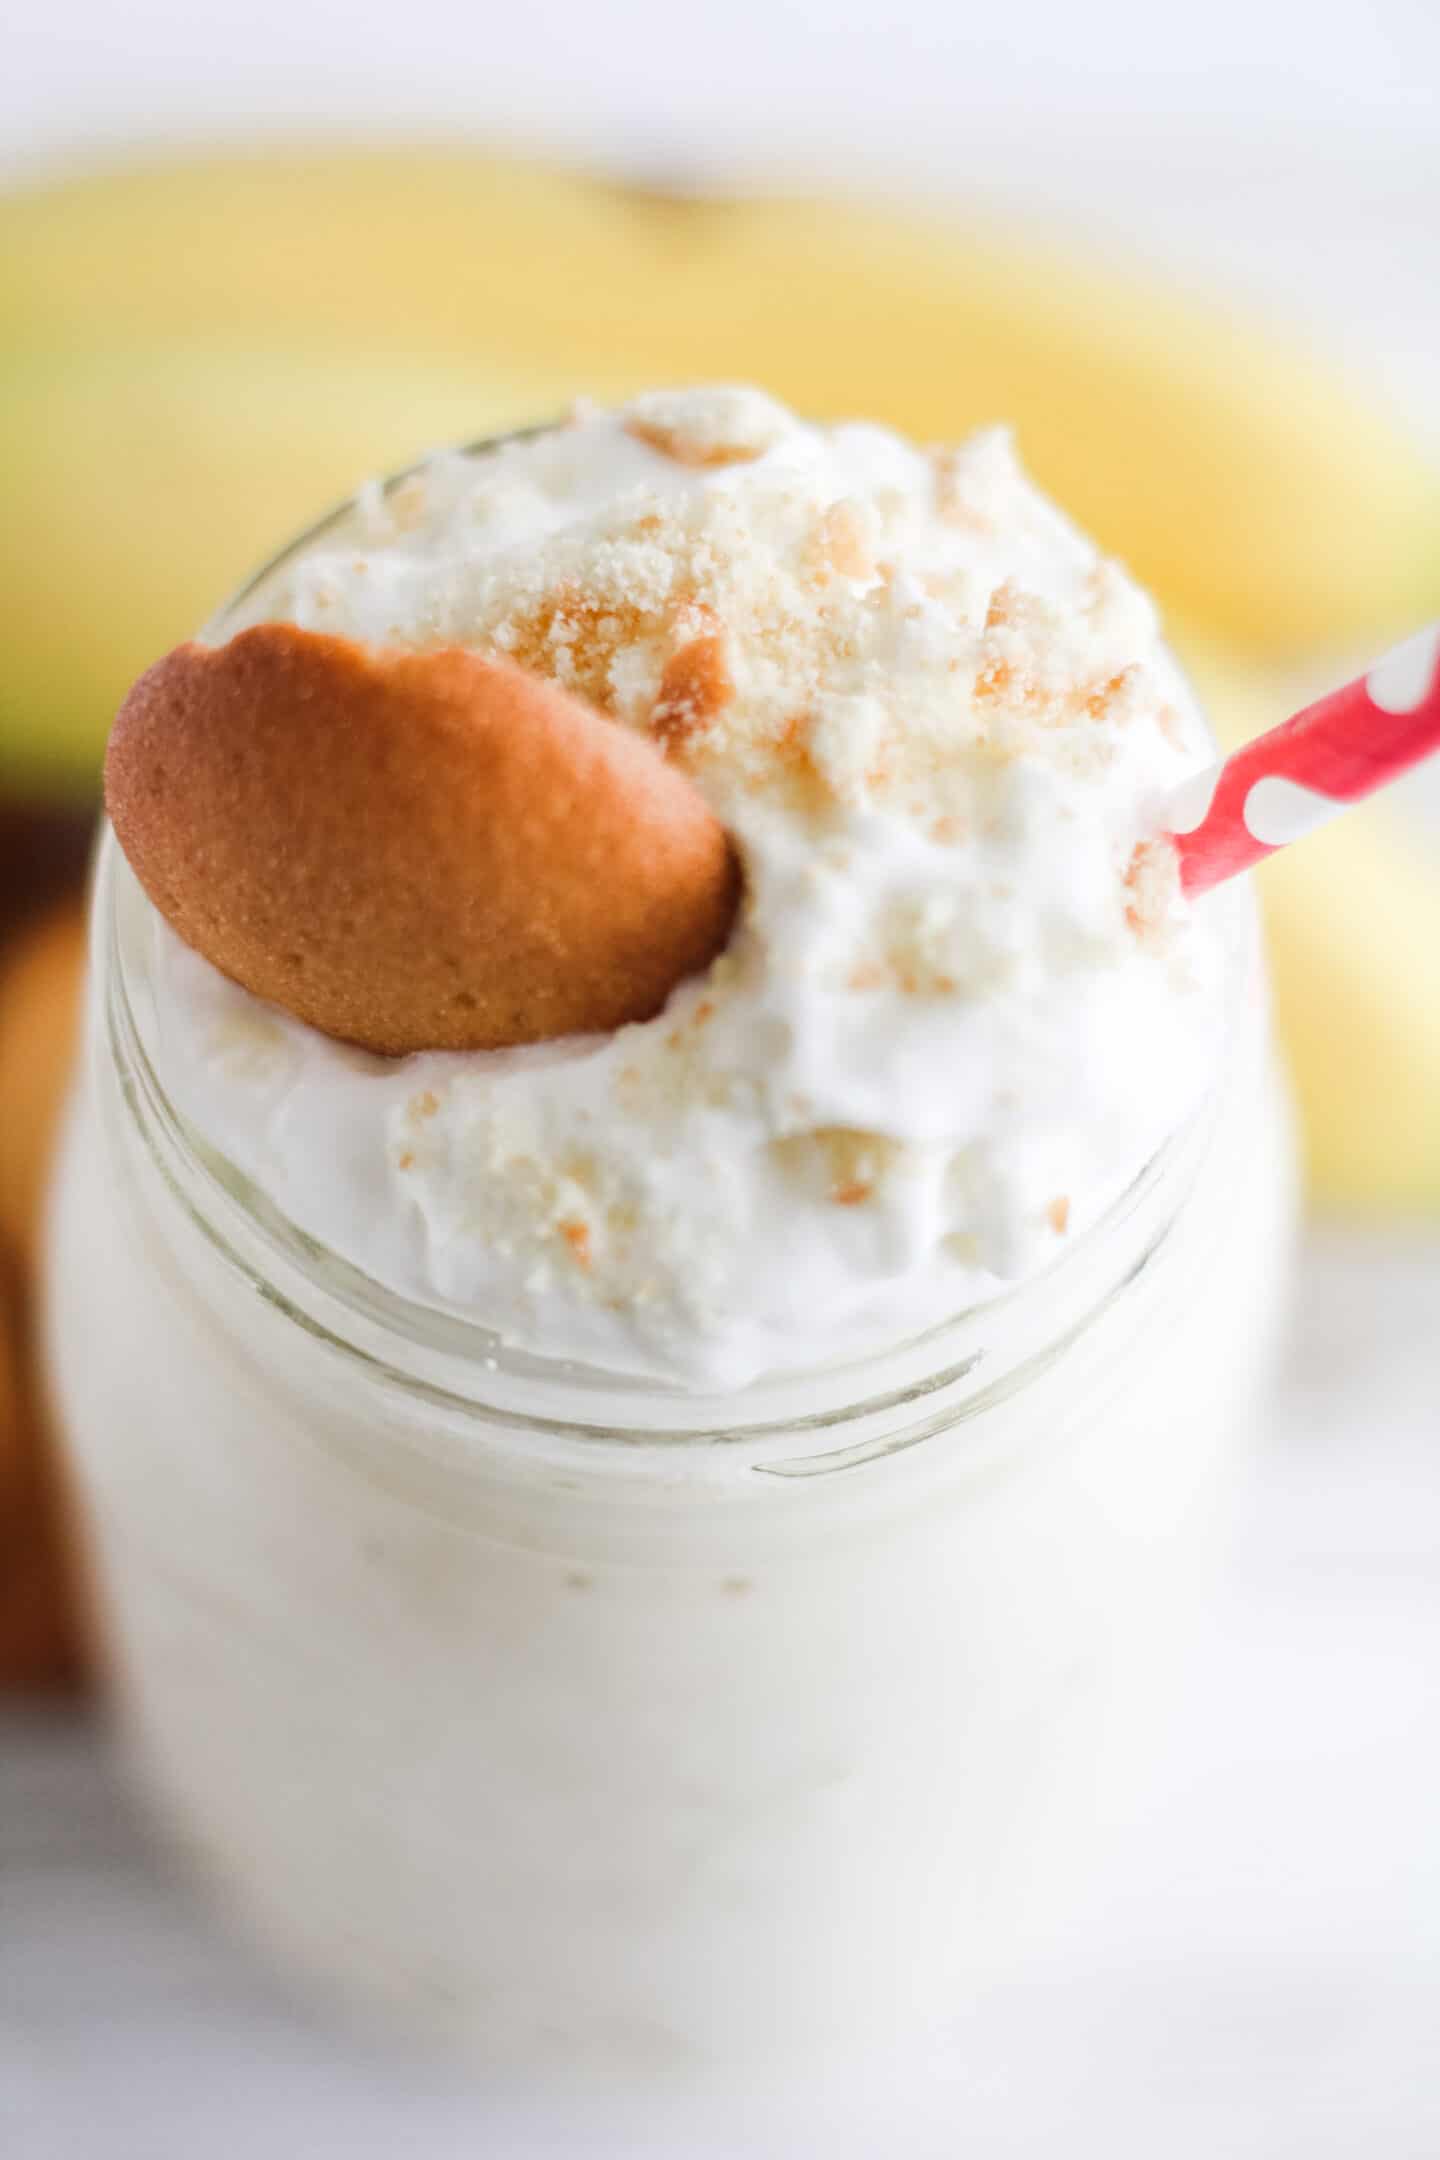 If you love banana pudding or banana cream pie, starting your day with this simple Banana Protein Shake is a must. Not only does it give a great boost to your morning but it feels like you're actually having dessert for breakfast! You can easily drink this for breakfast, lunch, dinner, or dessert!  